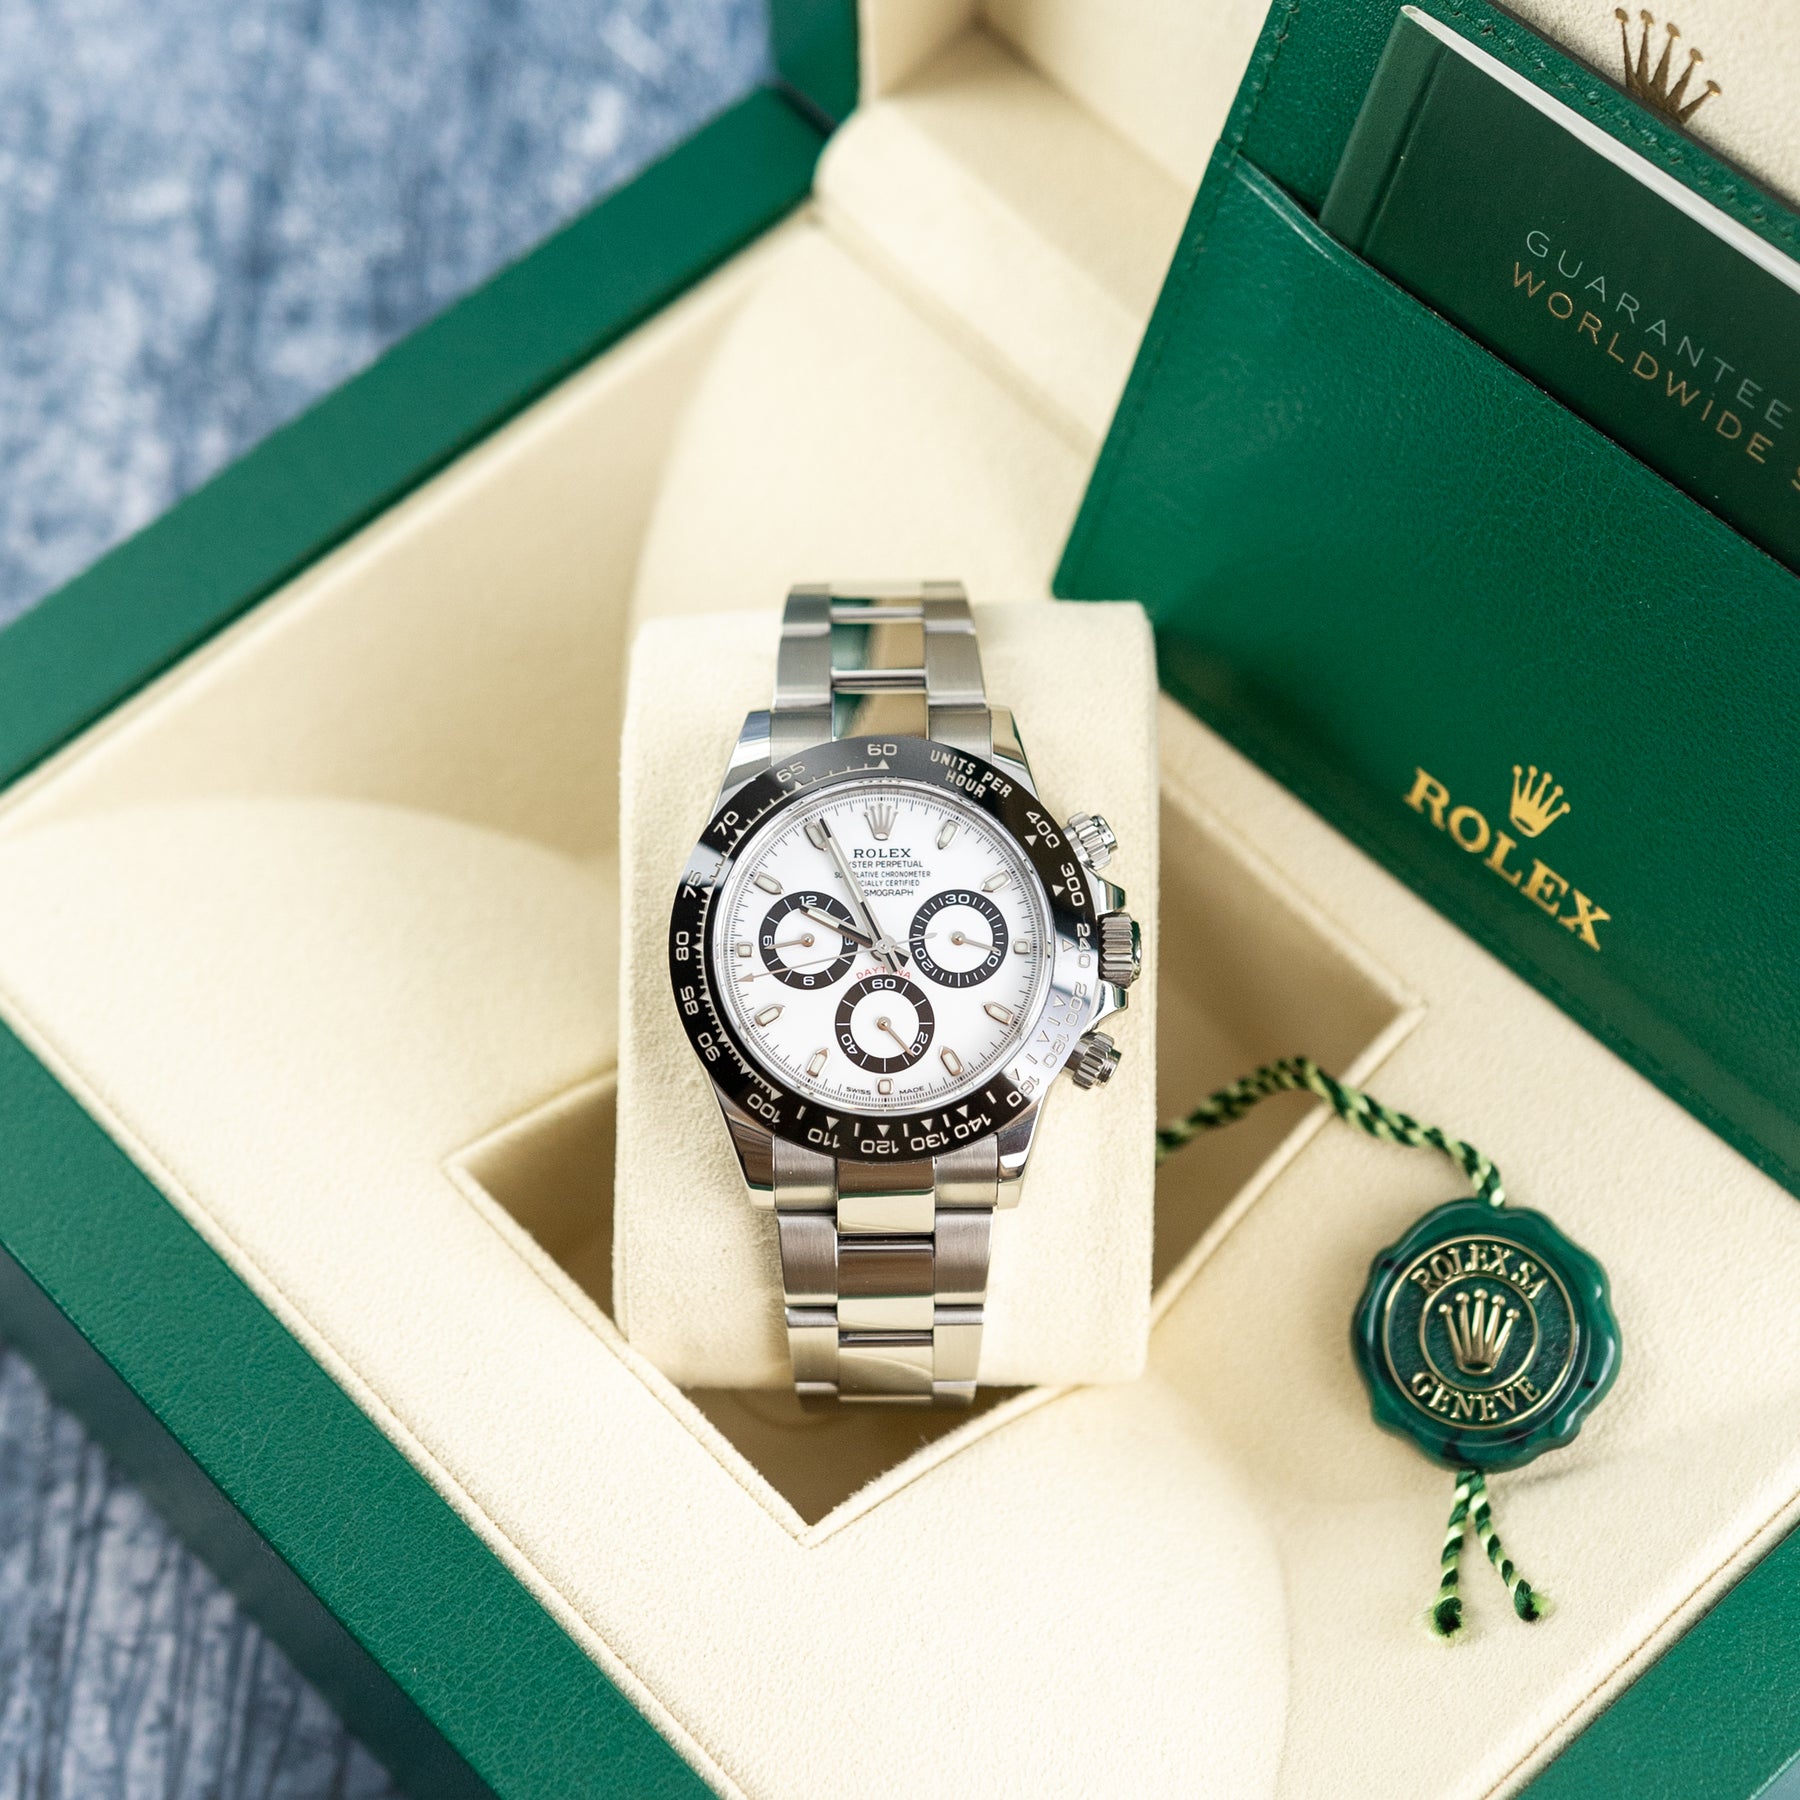 2021 Rolex COSMOGRAPH DAYTONA Oystersteel, Panda Dial 116500 available at RR Jewellers Yarm